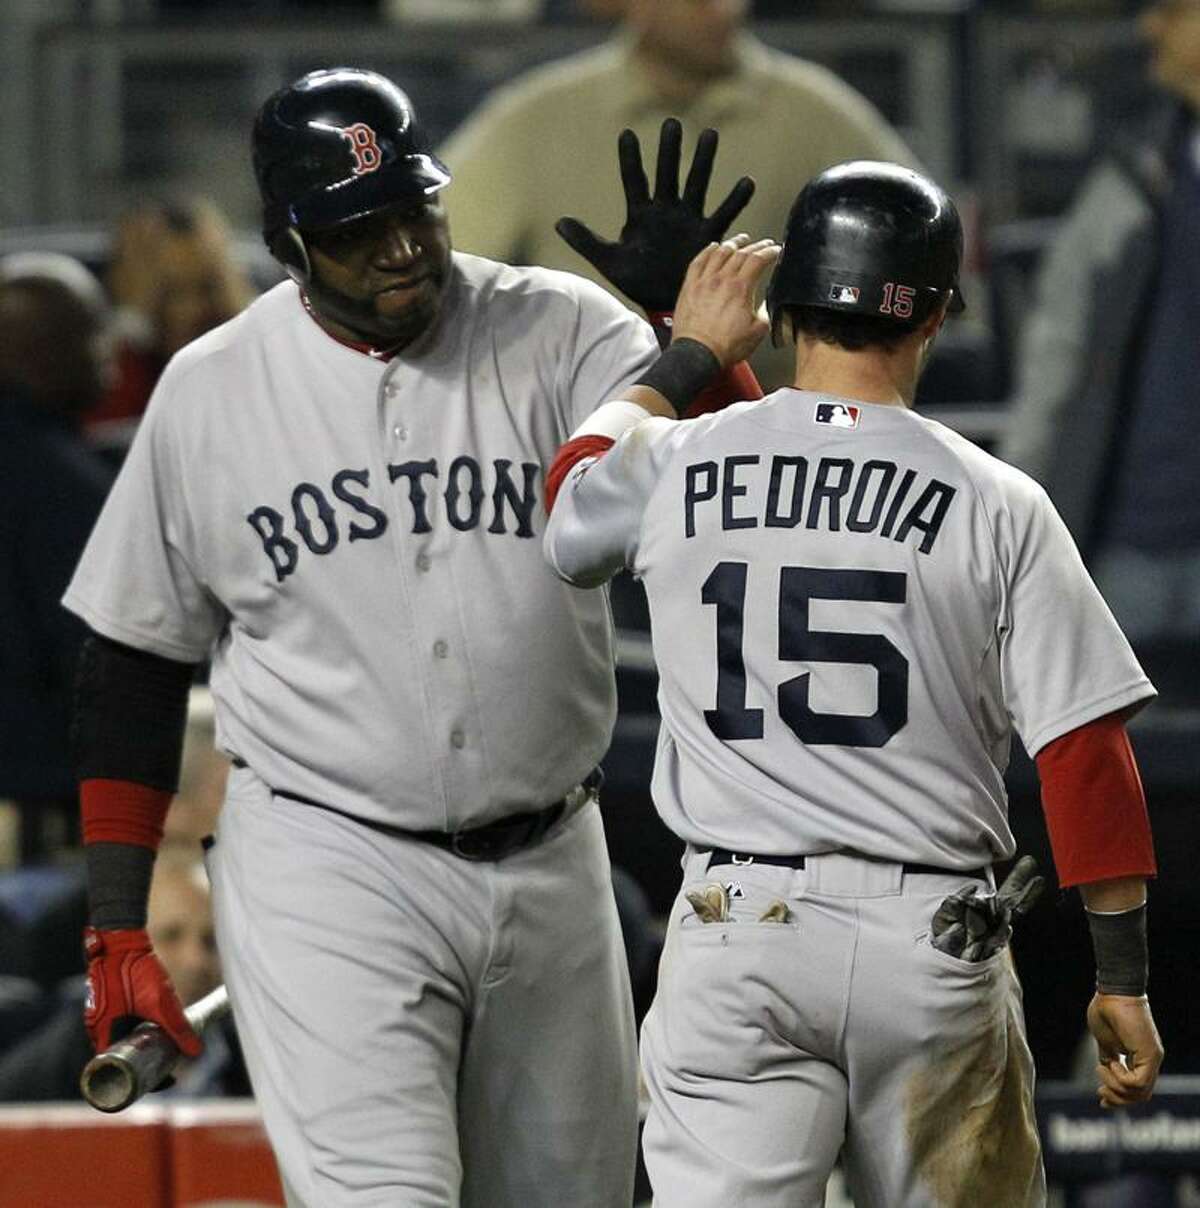 Boston Red Sox David Ortiz greets Dustin Pedroia (15) after Pedroia scored on Alex Rodriguez's seventh-inning error in their baseball game at Yankee Stadium Sunday, May 15, 2011 in New York. (AP Photo/Kathy Willens)